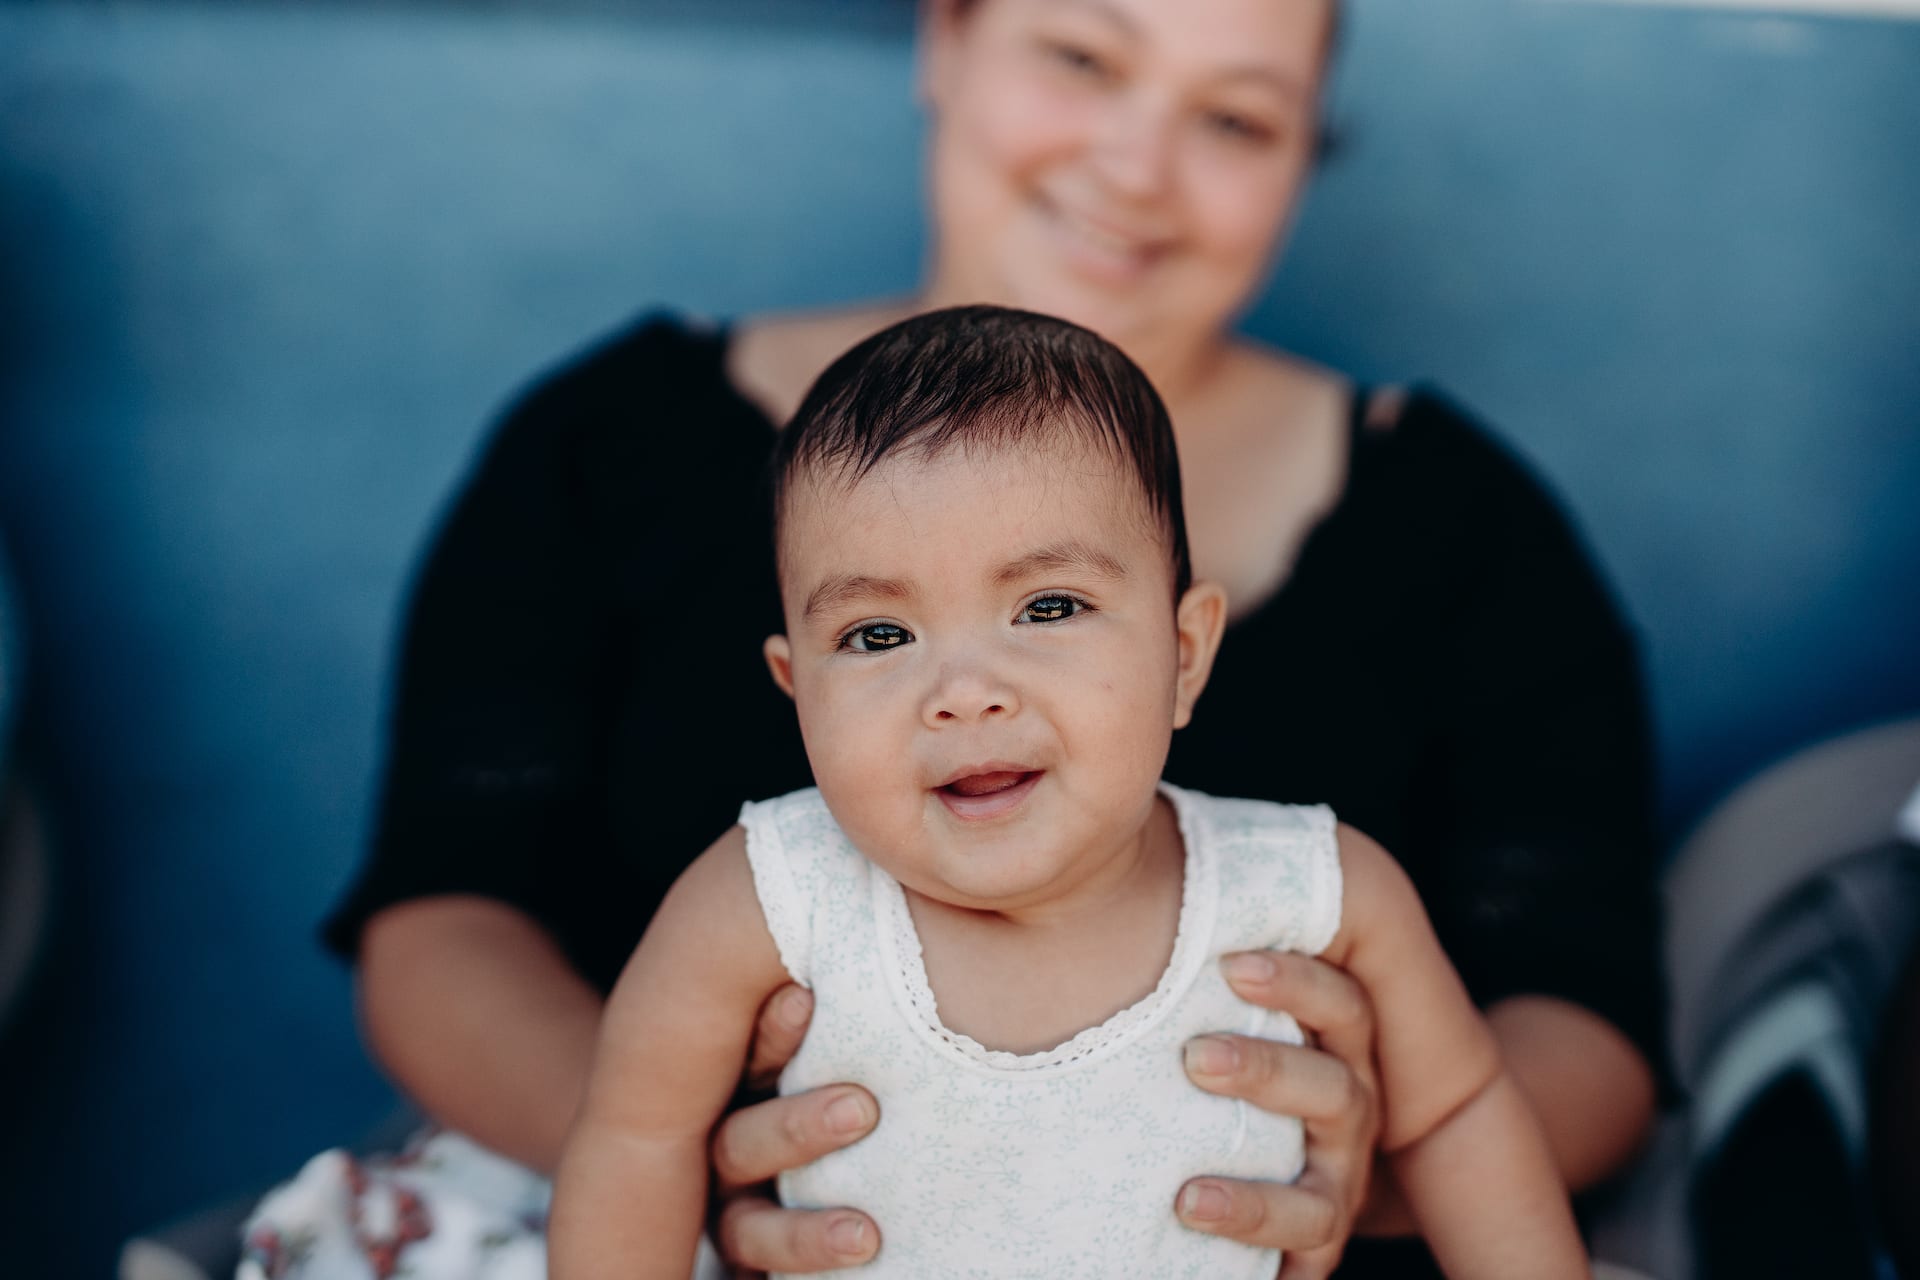 Mother holds smiling baby girl up to the camera. She is wearing a white shirt. The background is blue.